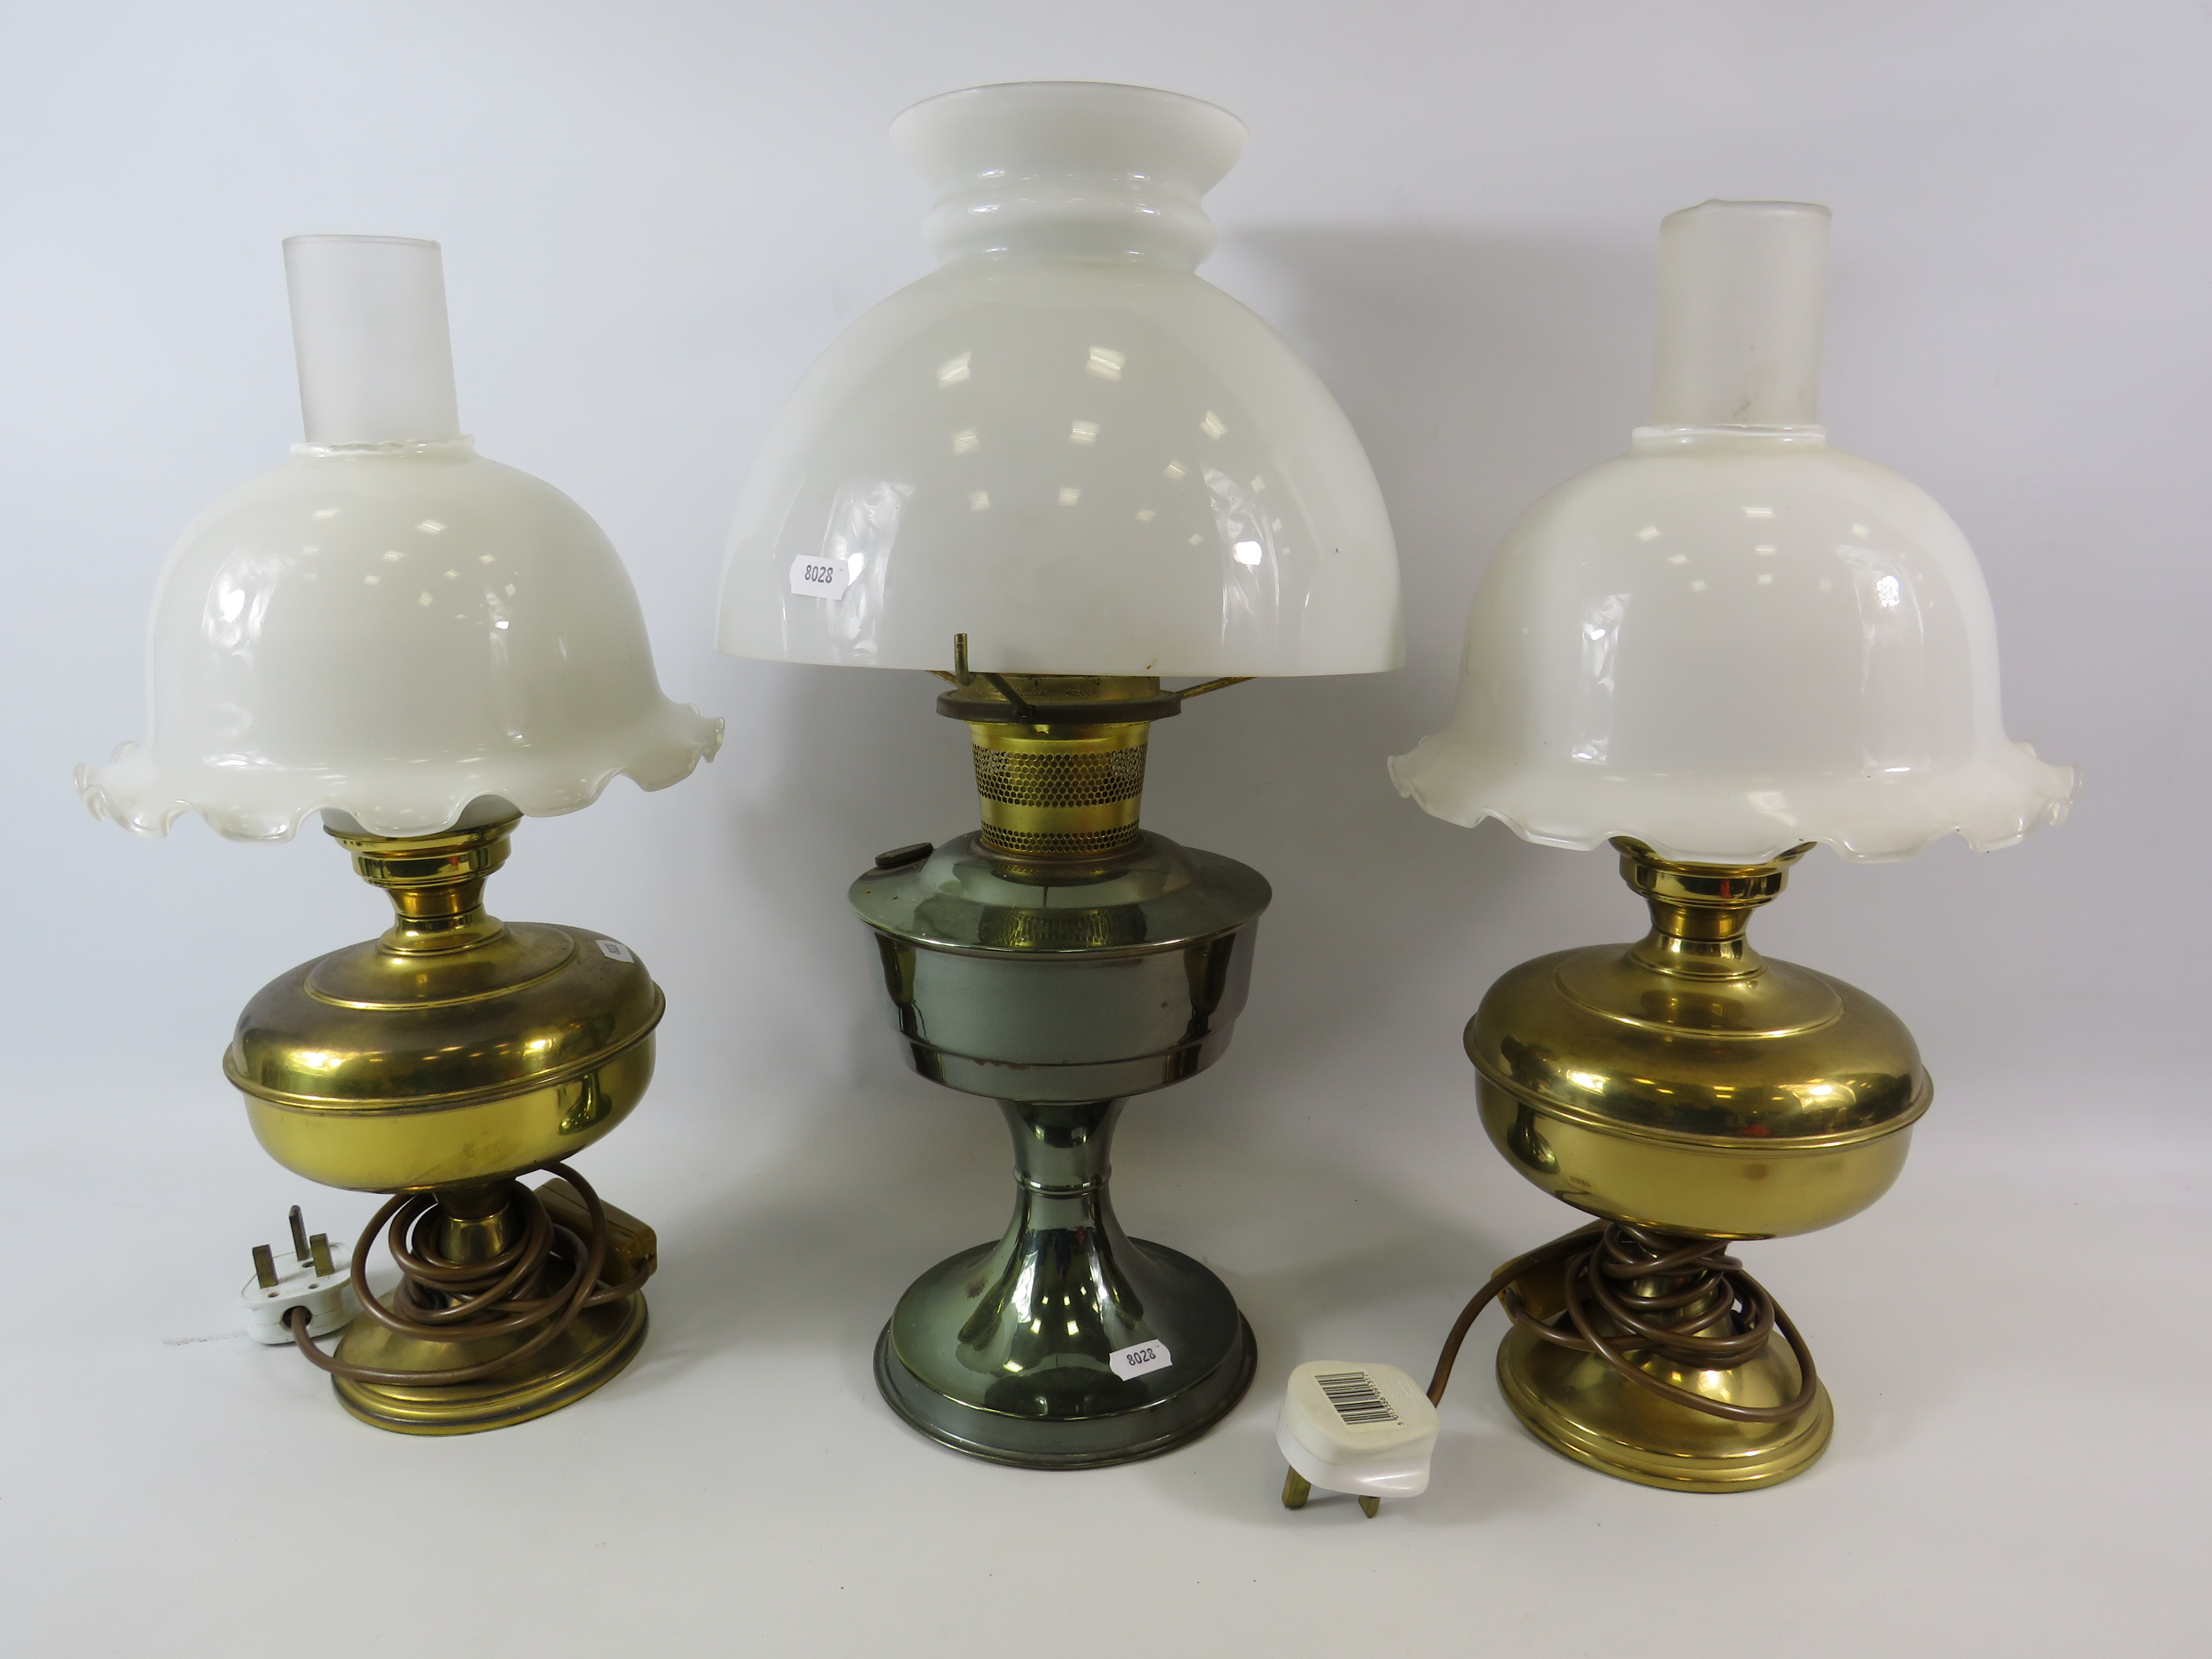 Aladdin oil lamp plus 2 converted to electric oil lamps.